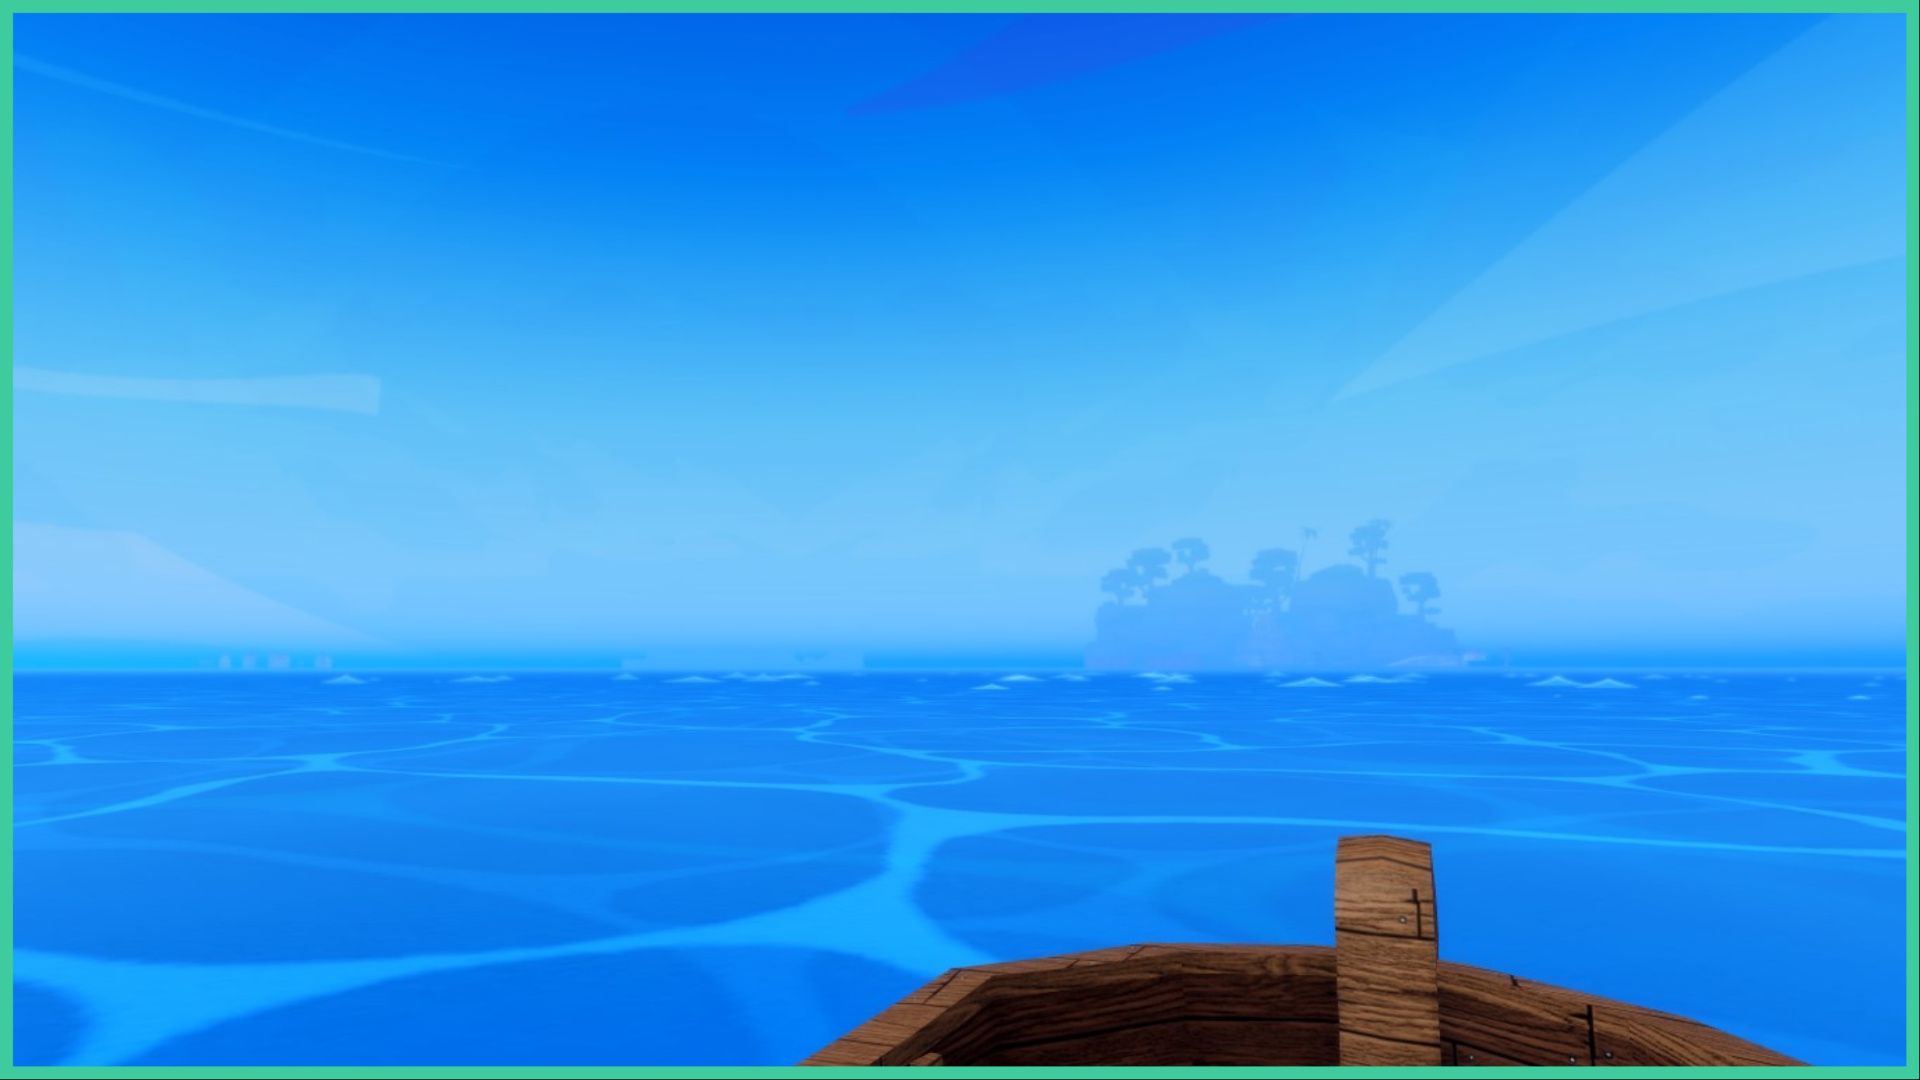 feature image for our demon piece kuma guide, the screenshot is from a POV inside a wooden boat that is sailing across the blue ocean as it heads towards a misty island far away